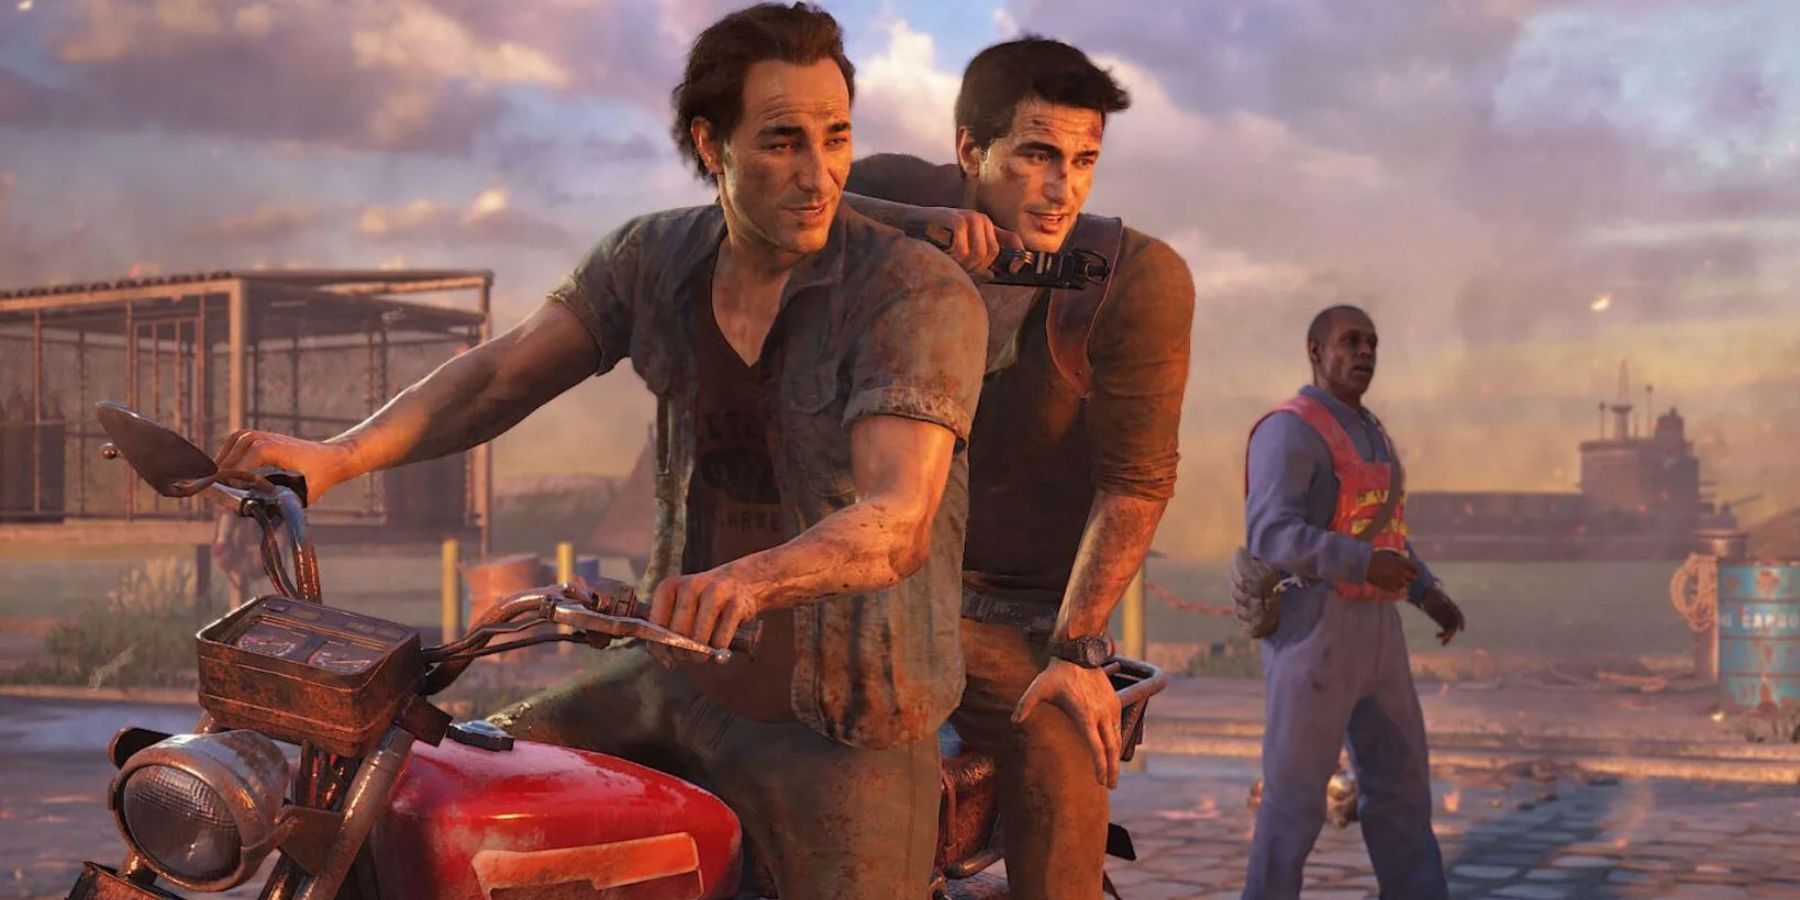 Sam and Nathan Drake riding a motorcycle in Uncharted 4: A Thief's End